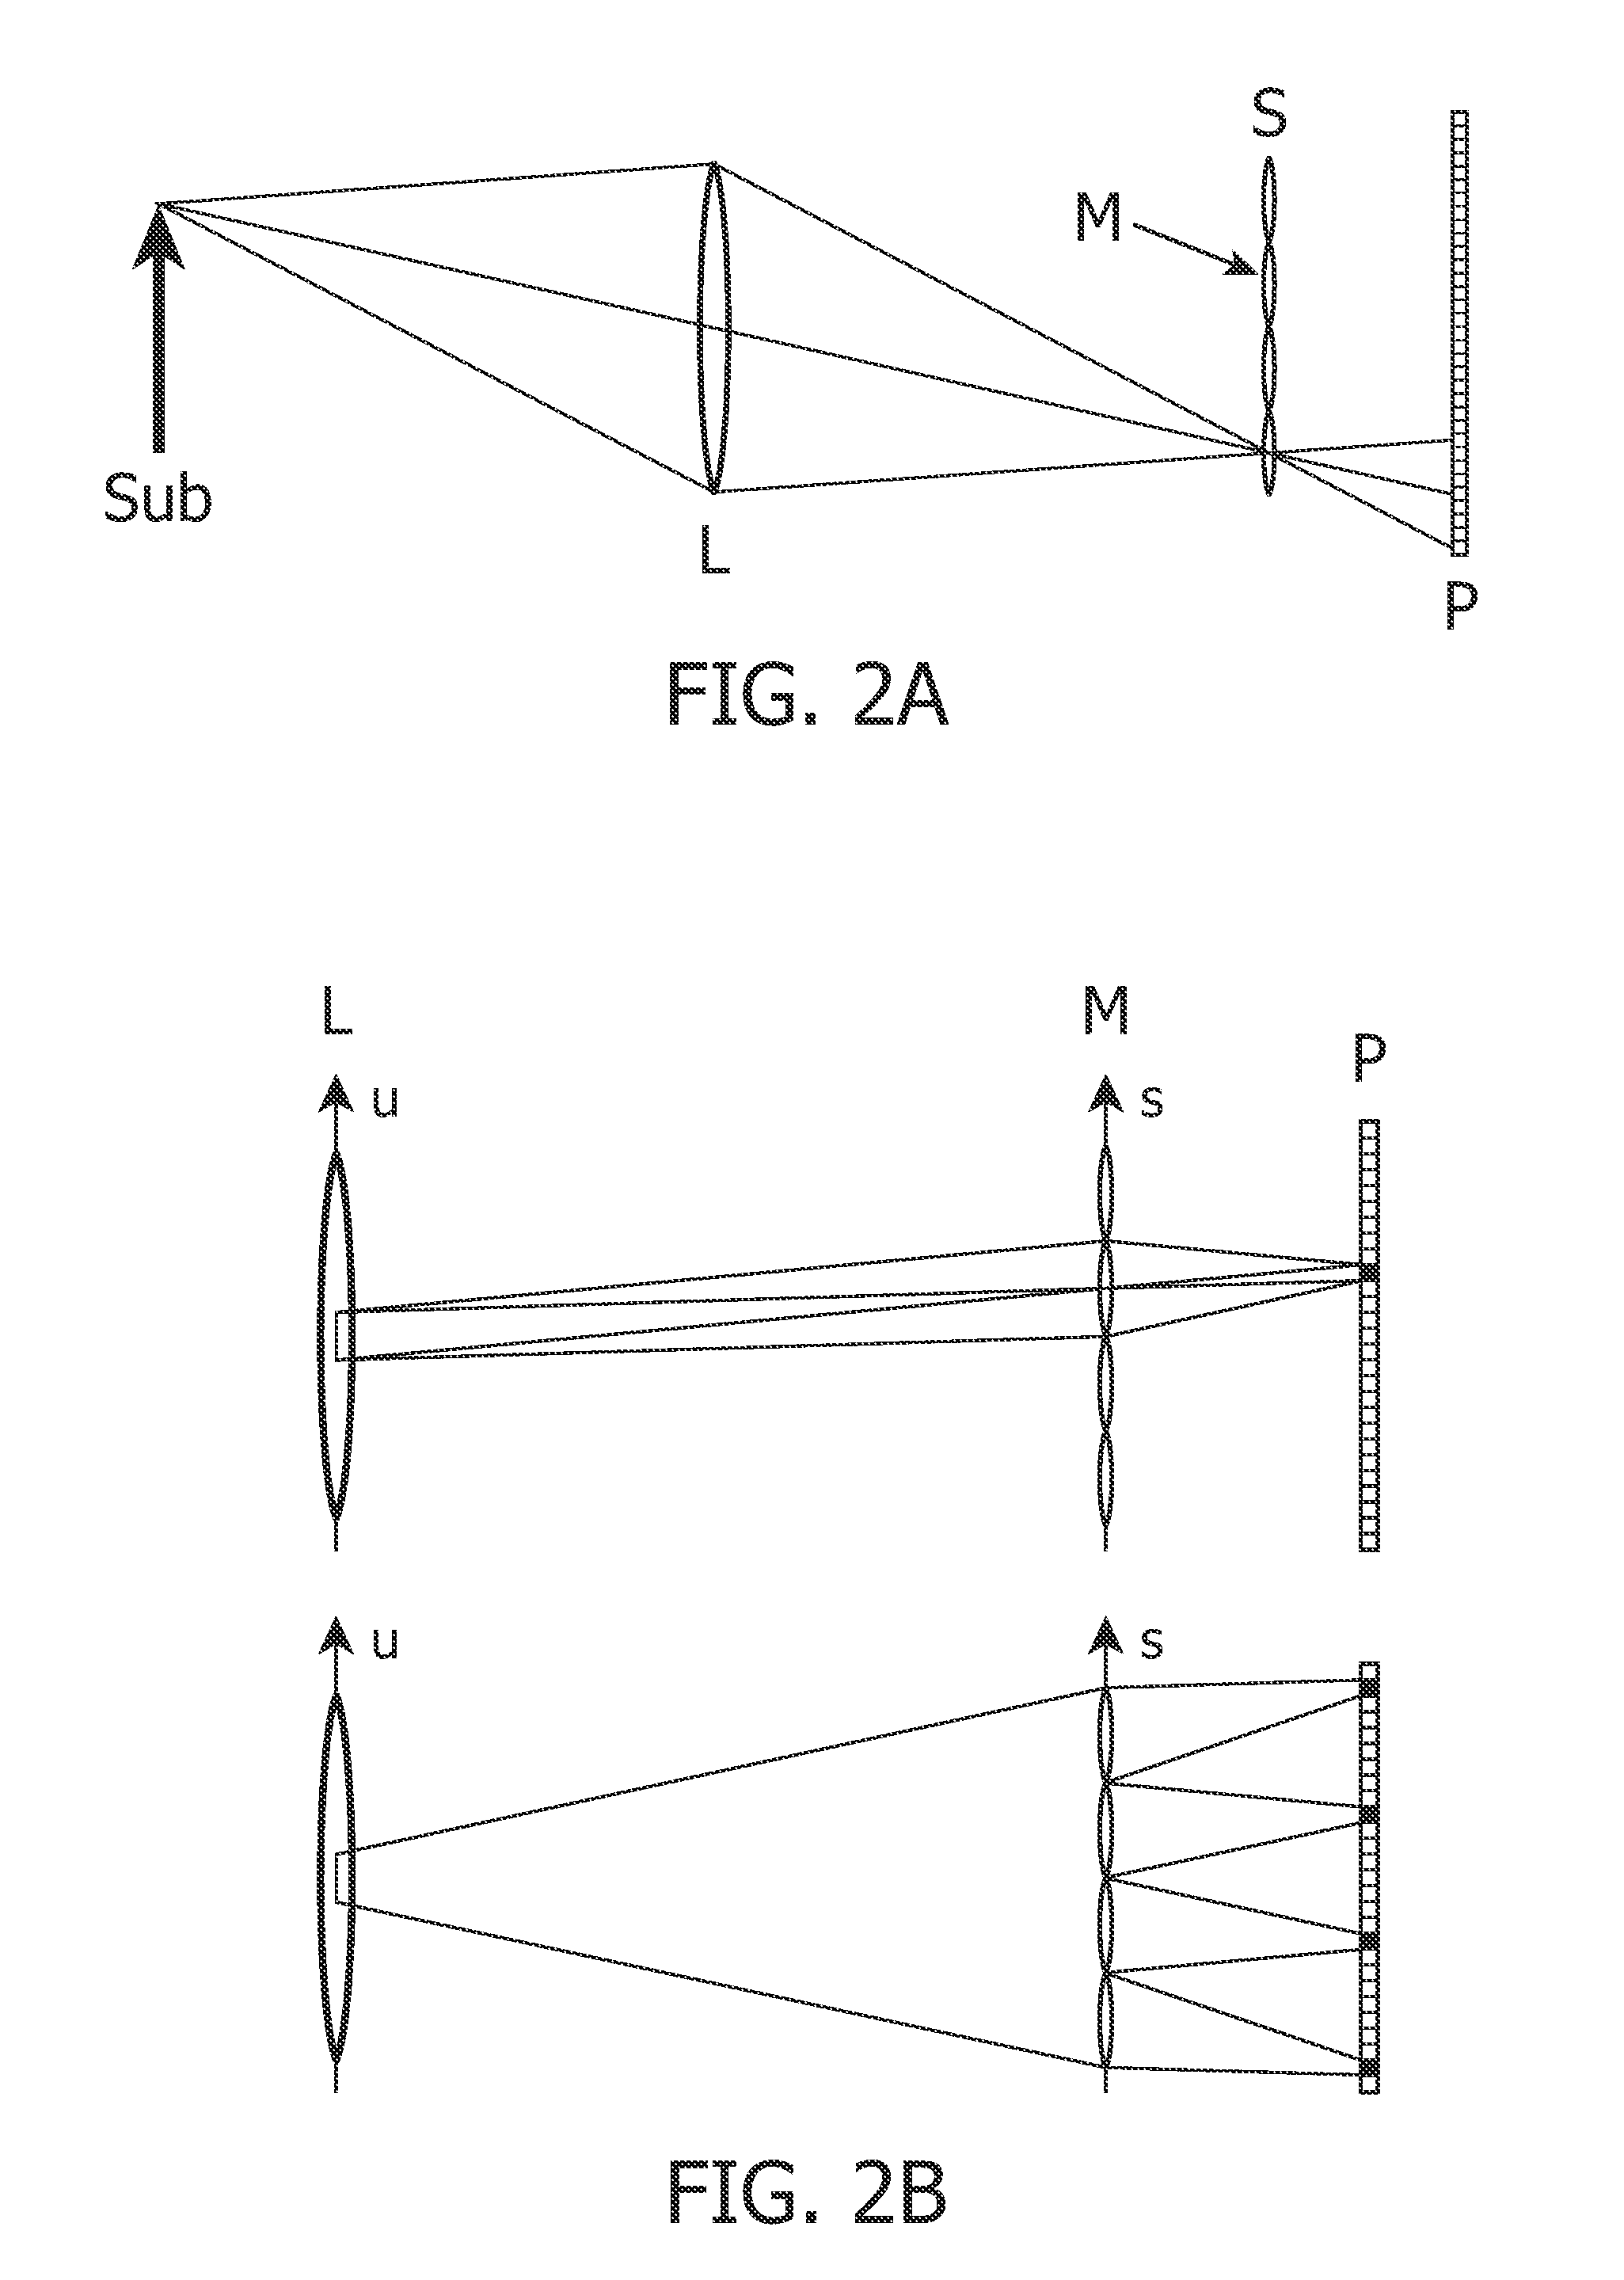 Method and system for producing a virtual output image from data obtained by an array of image capturing devices